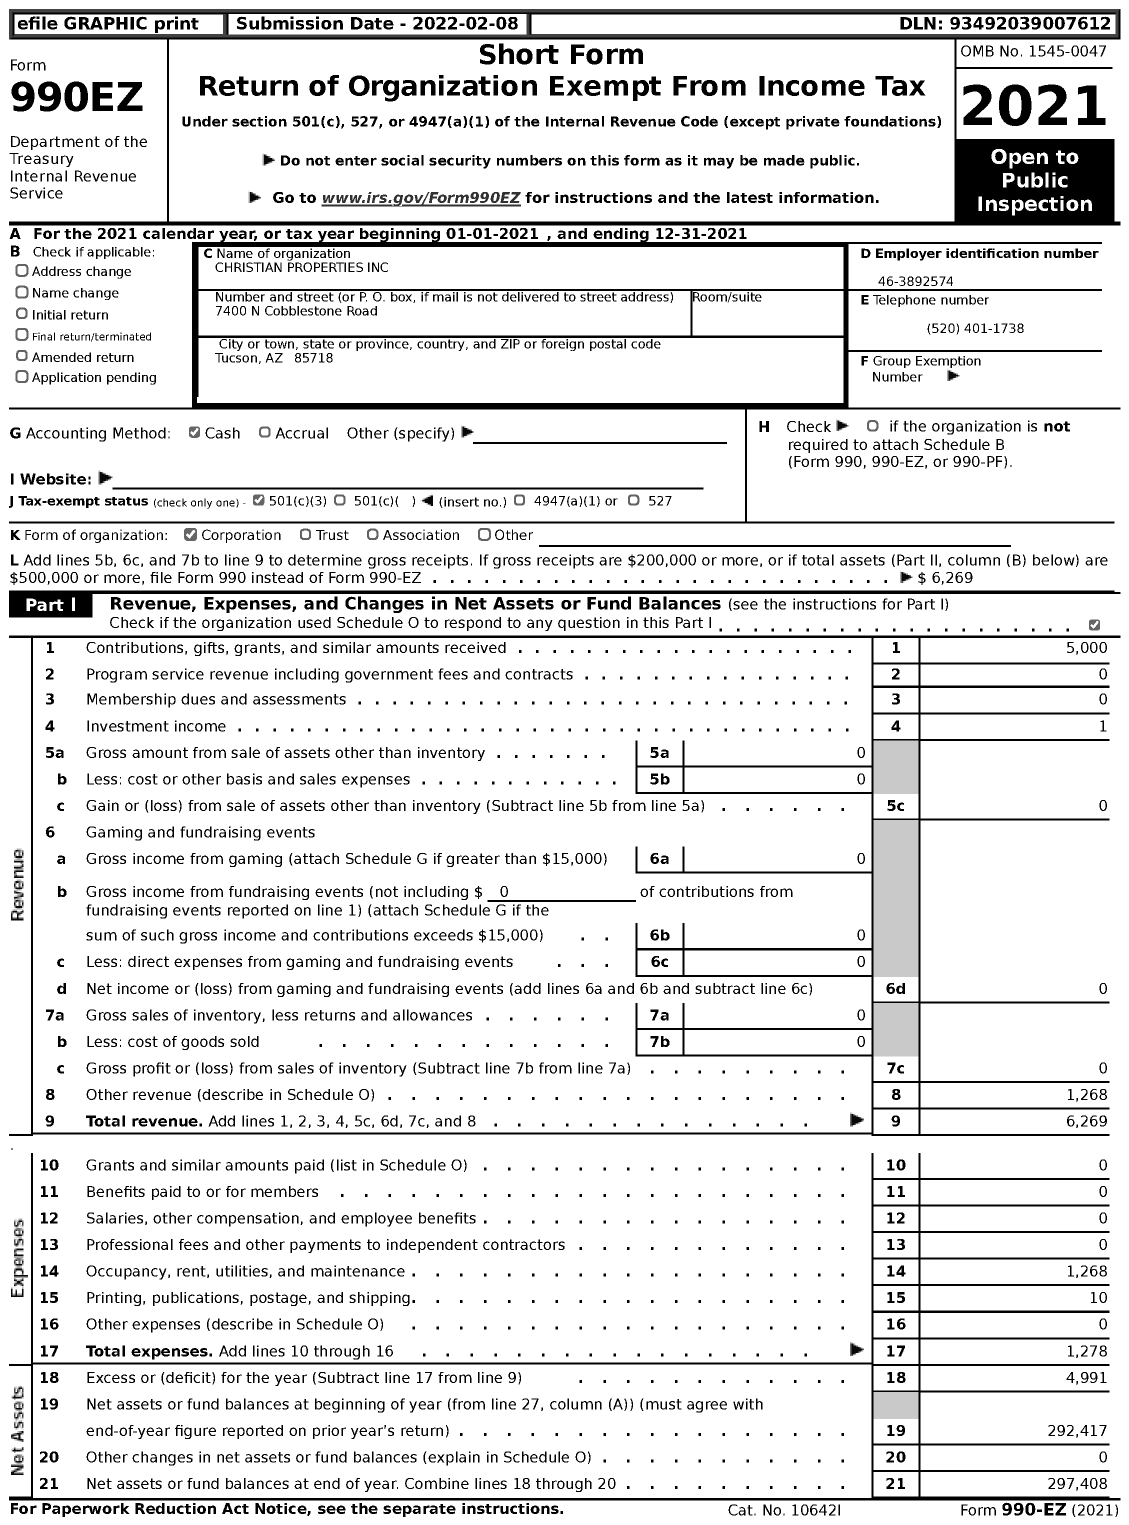 Image of first page of 2021 Form 990EZ for Christian Properties